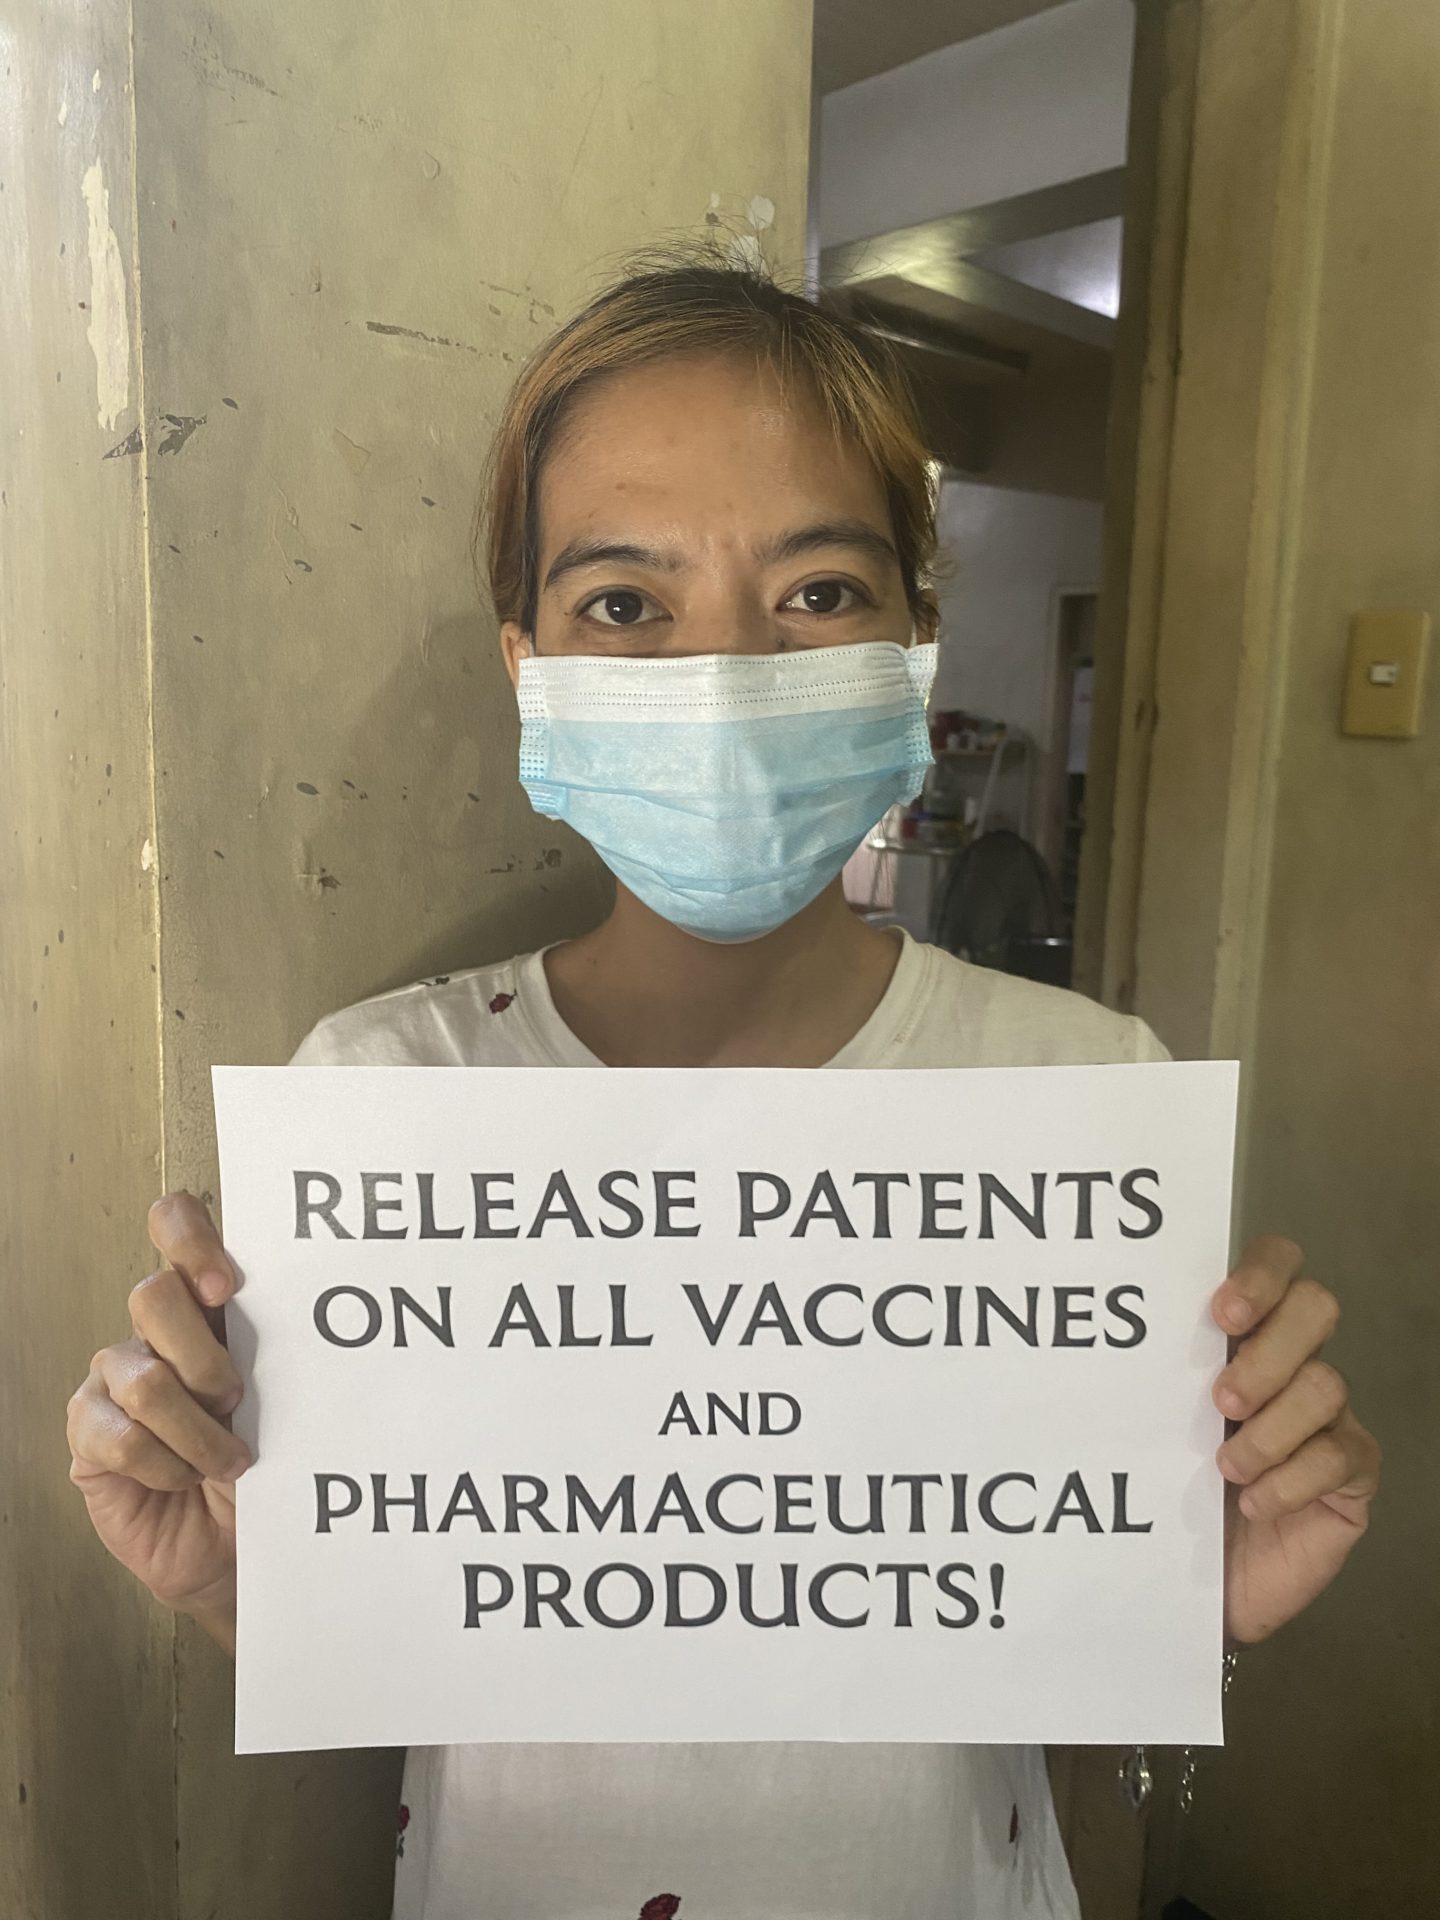 Release patents on all vaccines and pharmaceutical products!